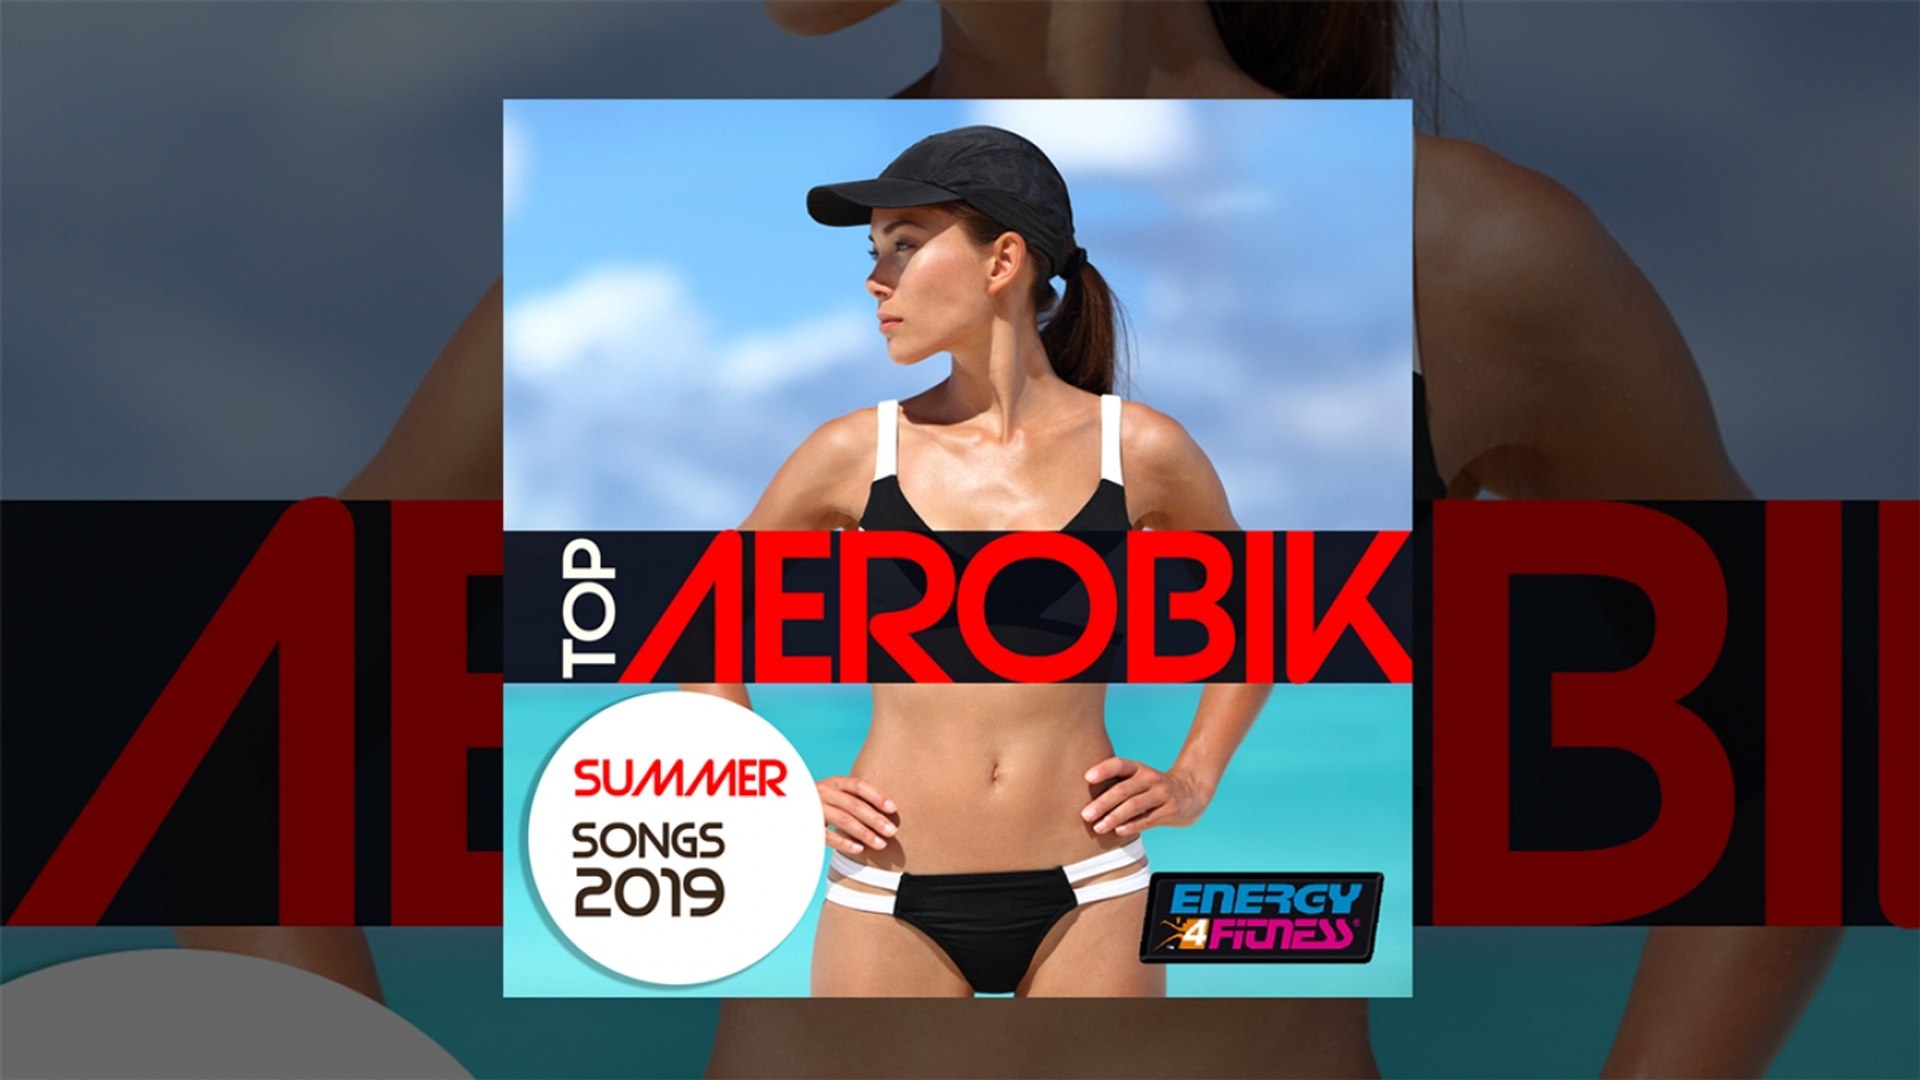 E4F - Top Aerobic Summer Songs 2019 - Fitness & Music 2019